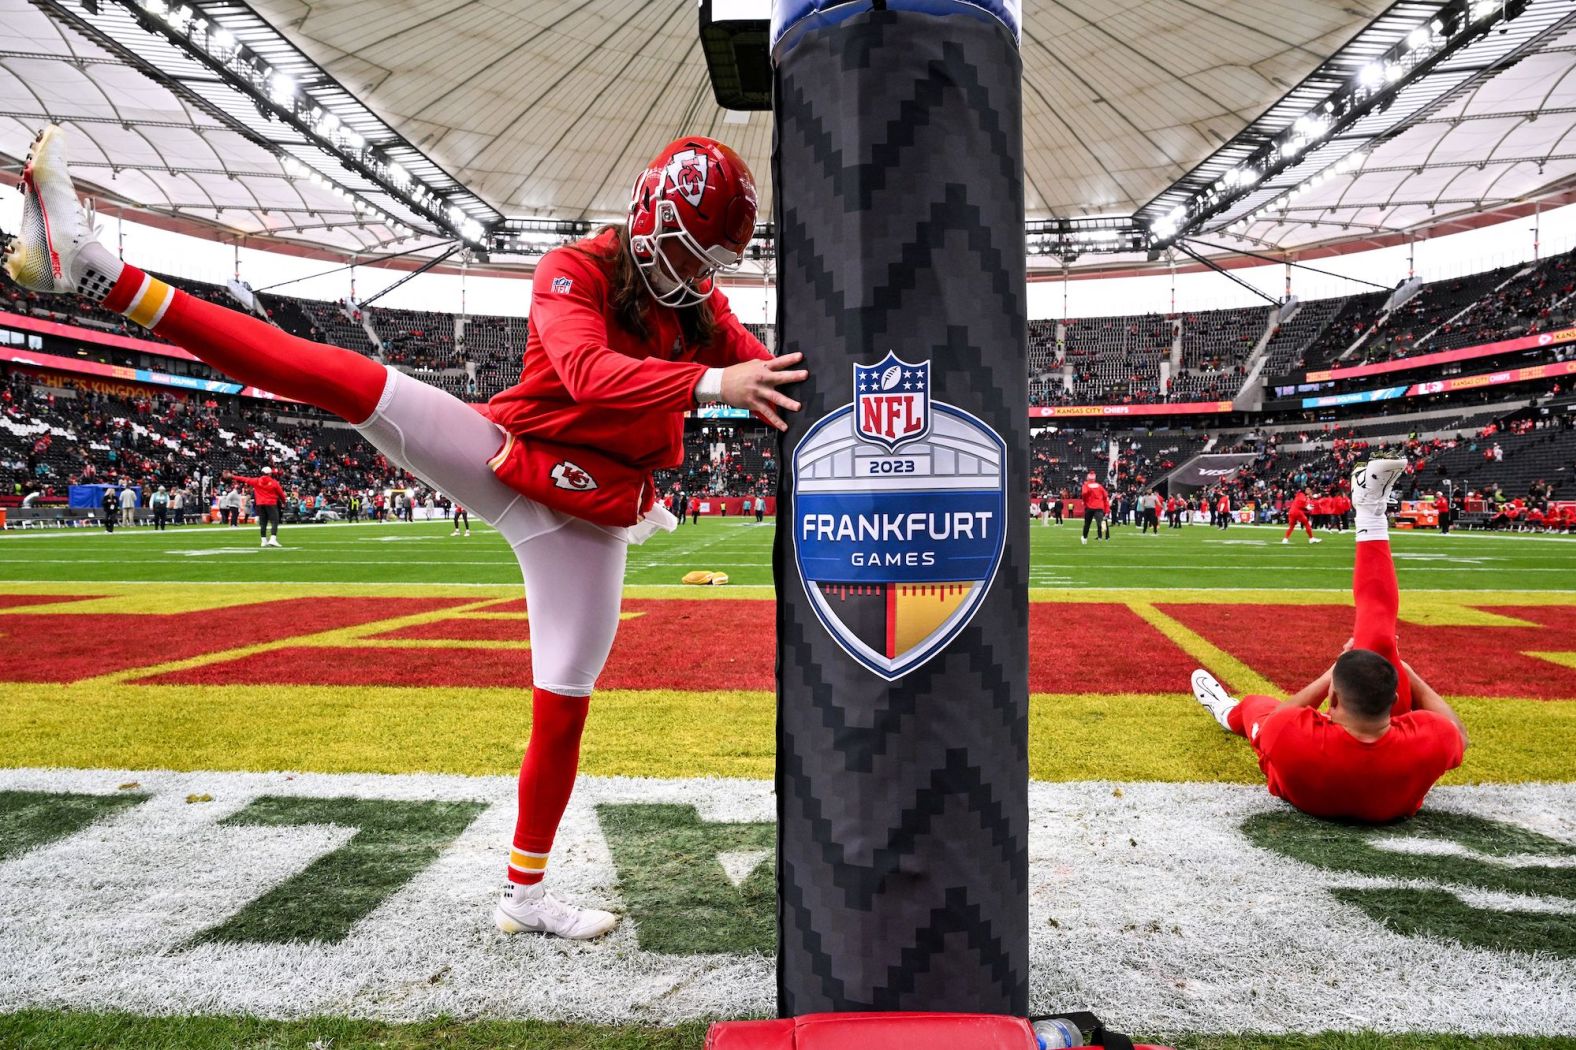 Kansas City Chiefs players warm up prior to a game against the Miami Dolphins in Frankfurt, Germany, on Sunday, November 5. The Chiefs beat the Dolphins 21-14.